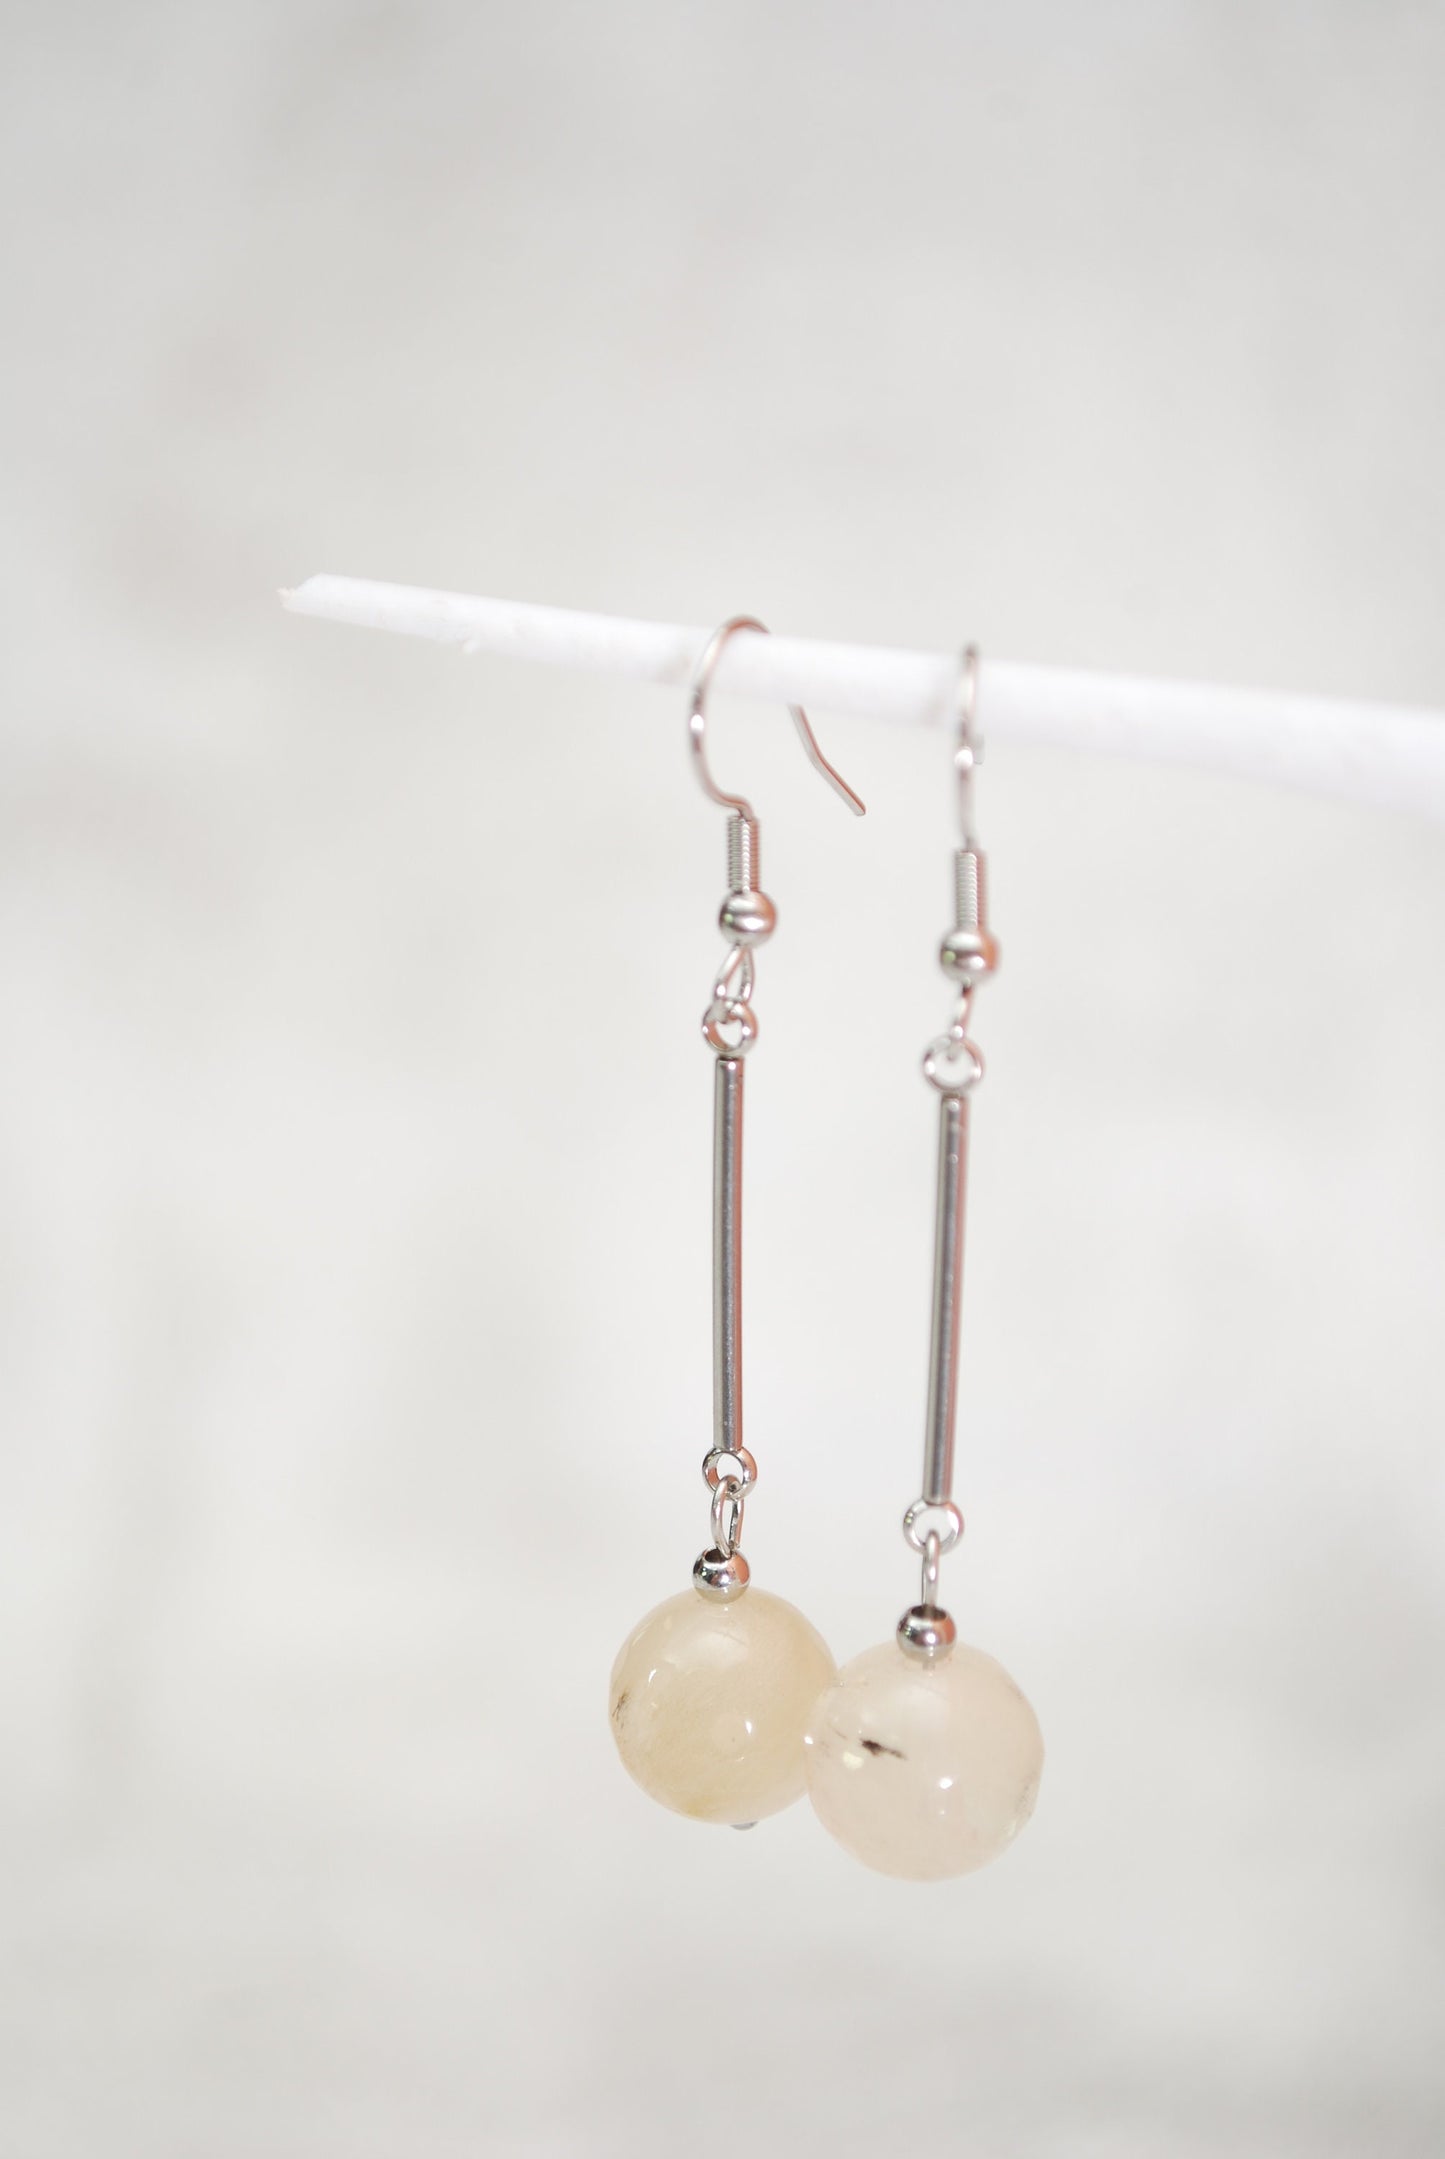 Estibela's Boho Agate Big Round Stone and Stainless Steel Stick Earrings: Enhancing Beauty and Artistry in Your Jewelry Collection.